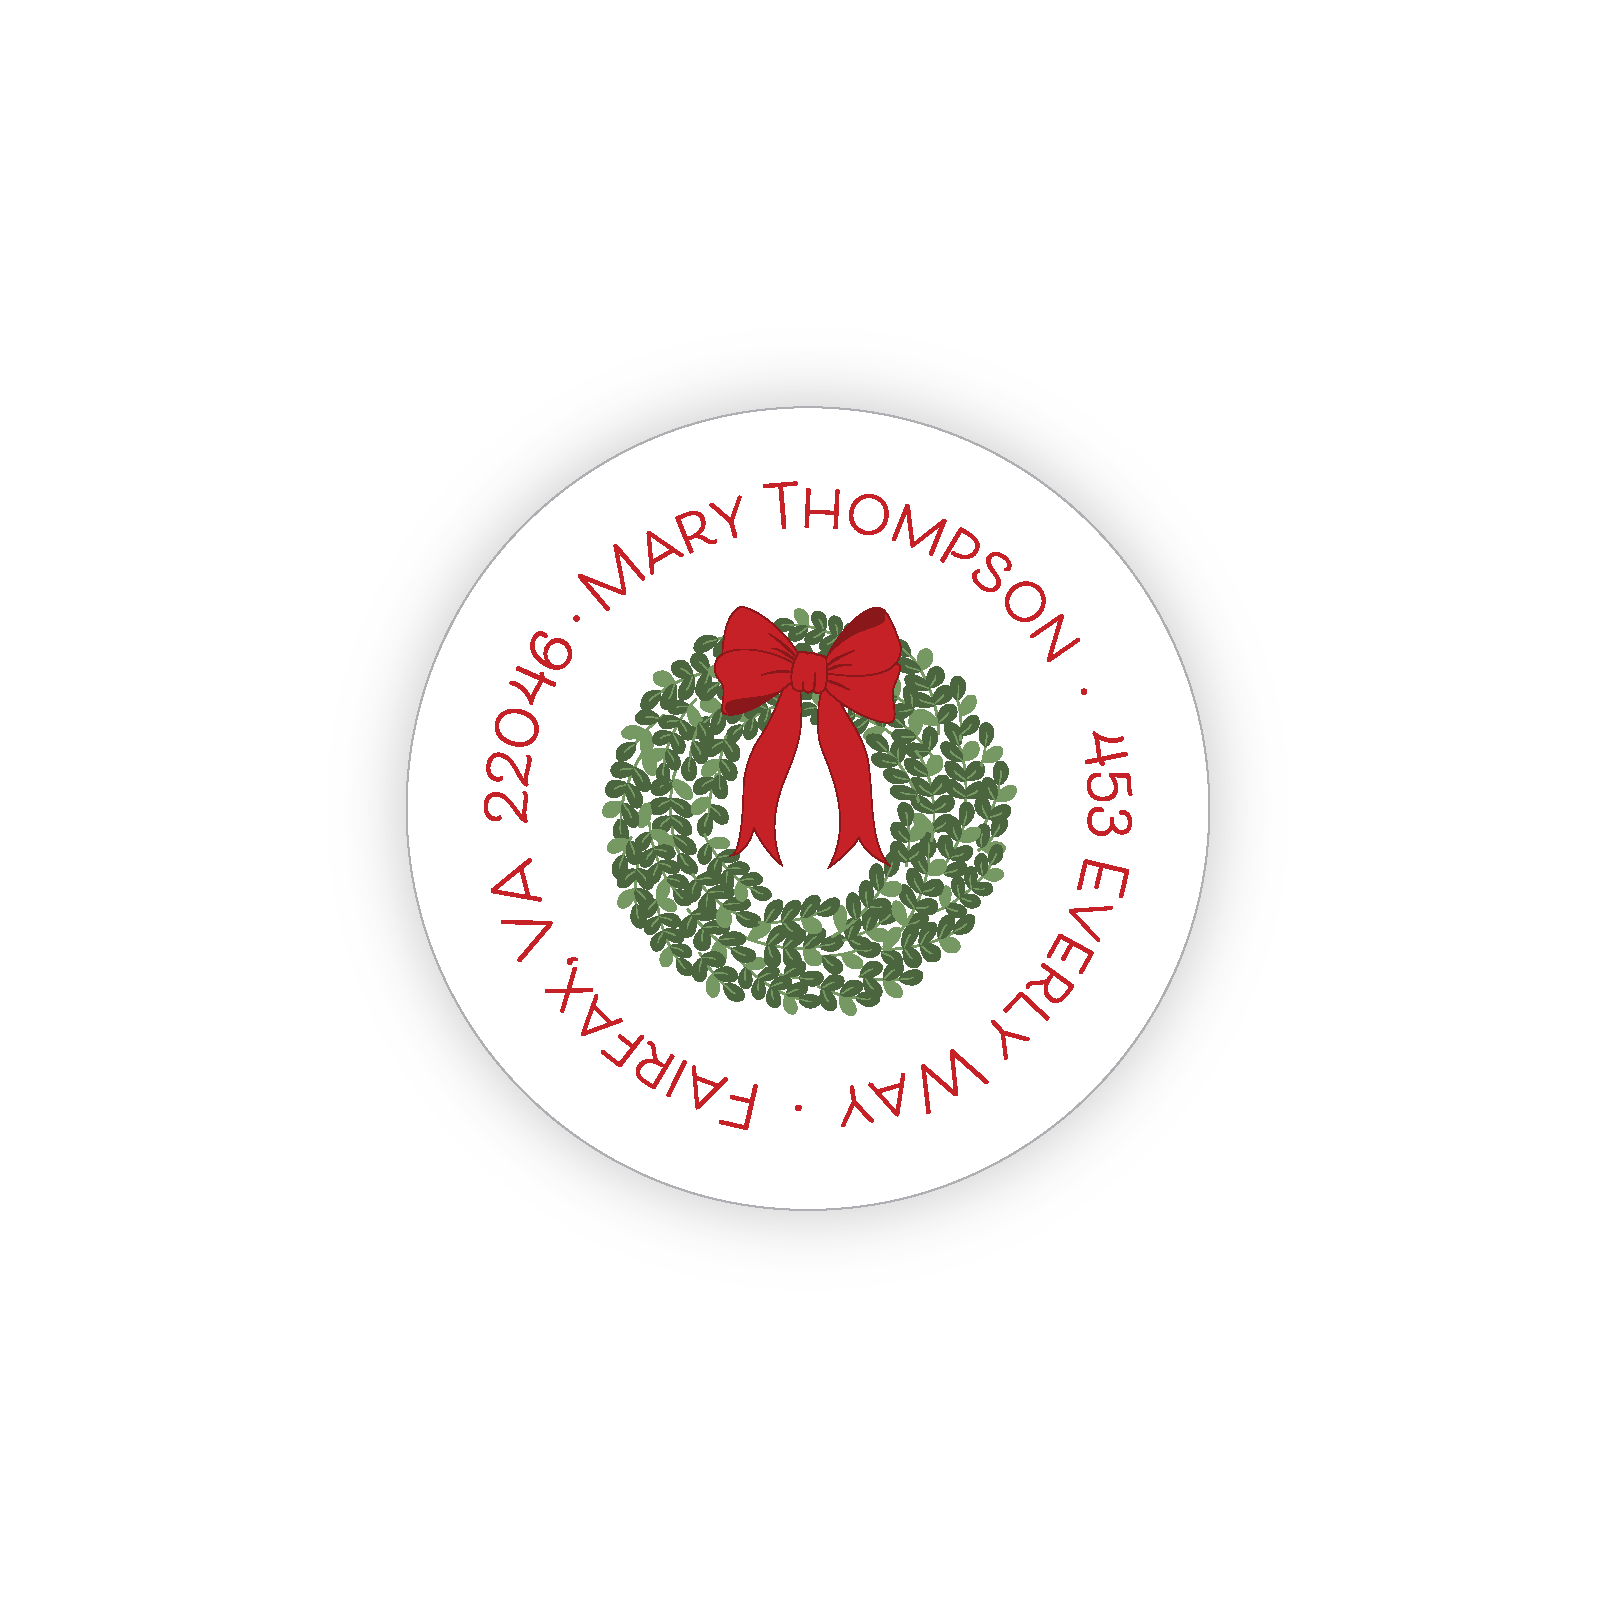 Green boxwood wreath with a red bow on a round address label.  The address is in a circle around the edge of the label. 